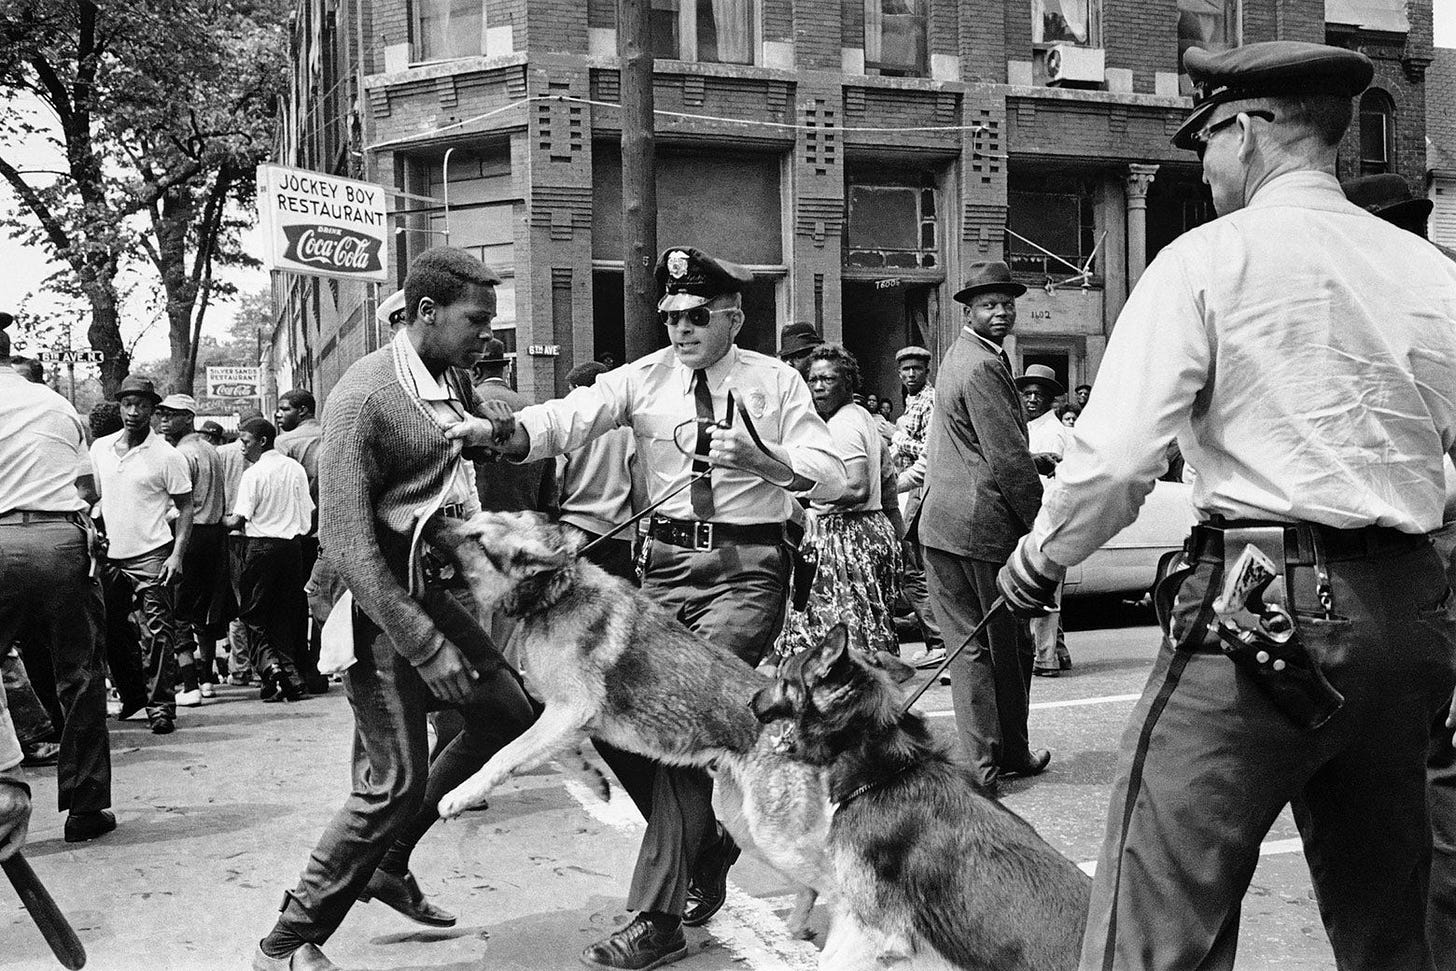 Birmingham civil rights history: The backstory behind the famous photo of  Walter Gadsden, officer Dick Middleton, and his police dog.